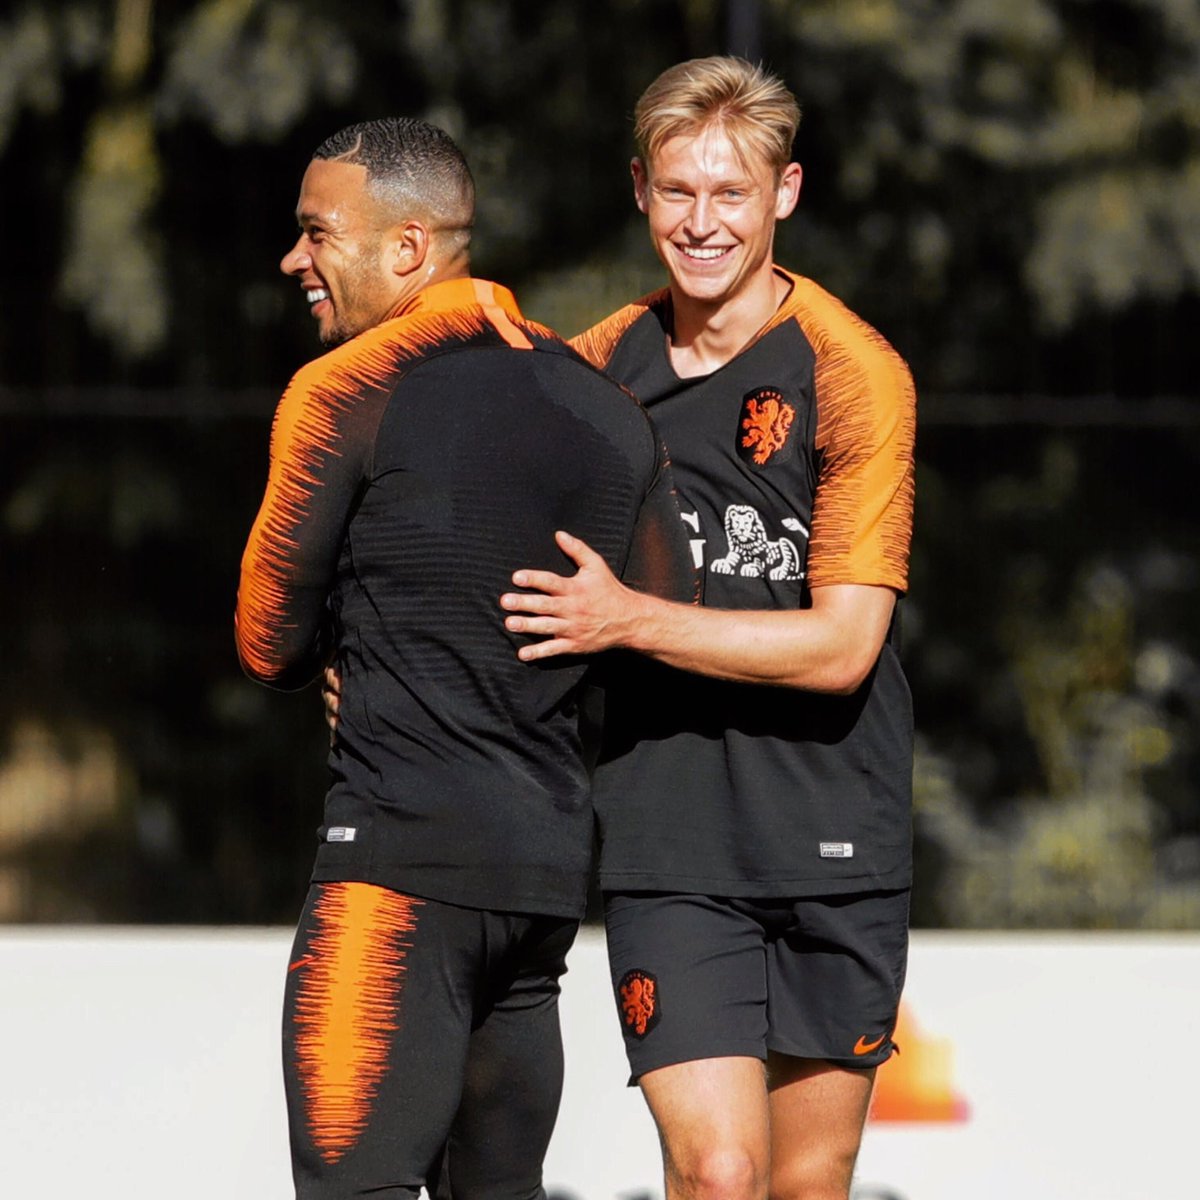 Memphis Depay recently said after the Nederland's loss to Mexico 'frenkie de jong is our engine'. This goes to show his impact on the pitch